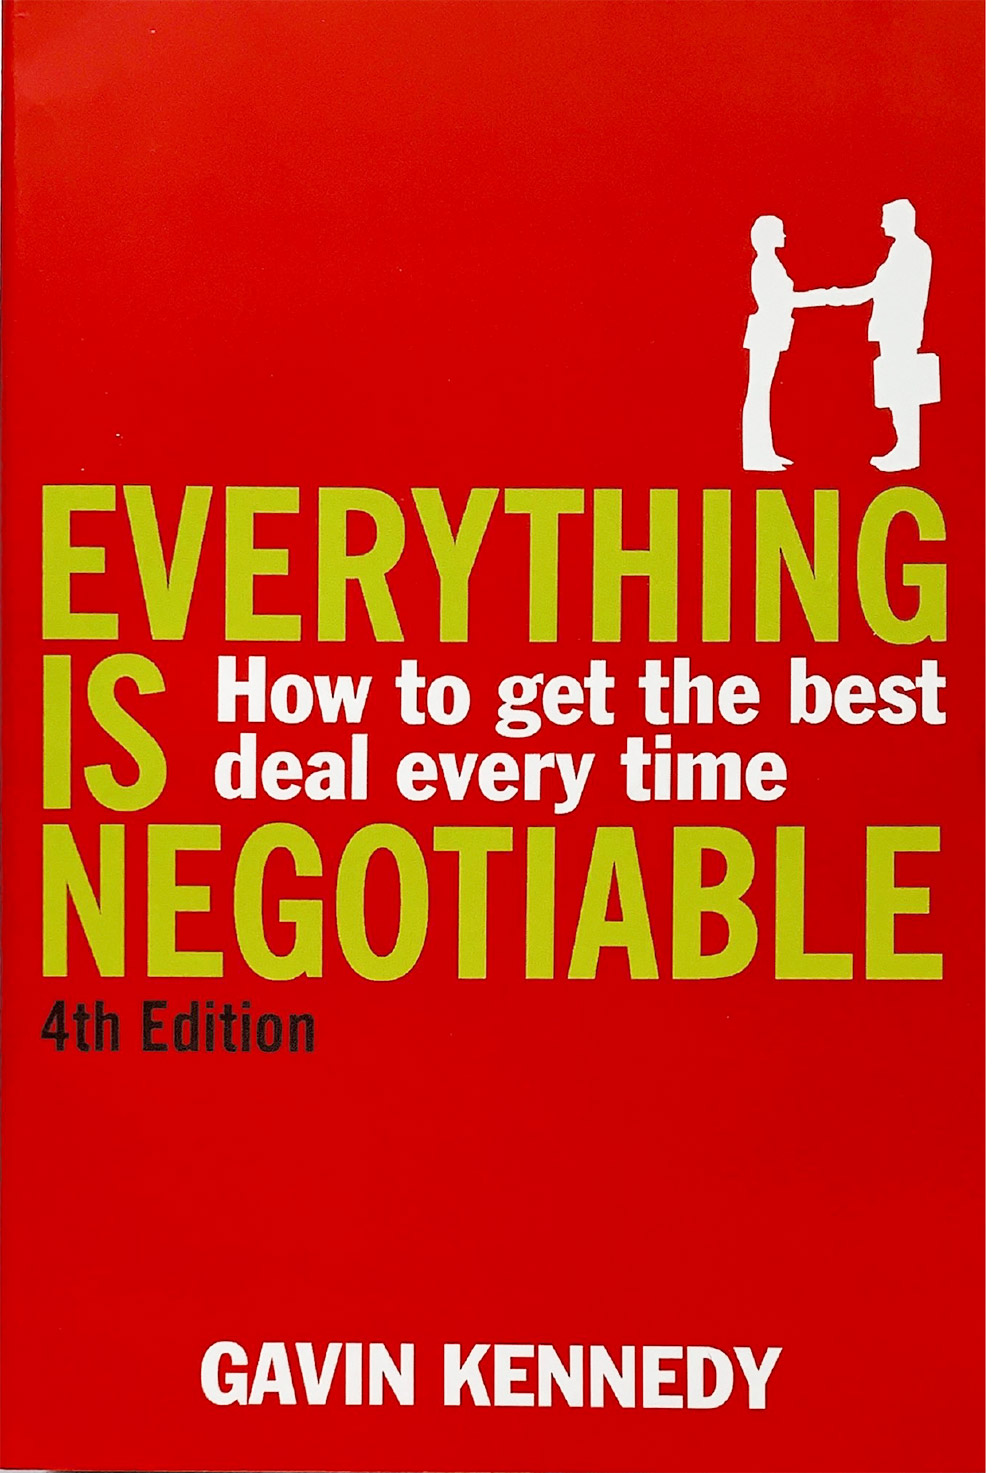 everything is negotiable book